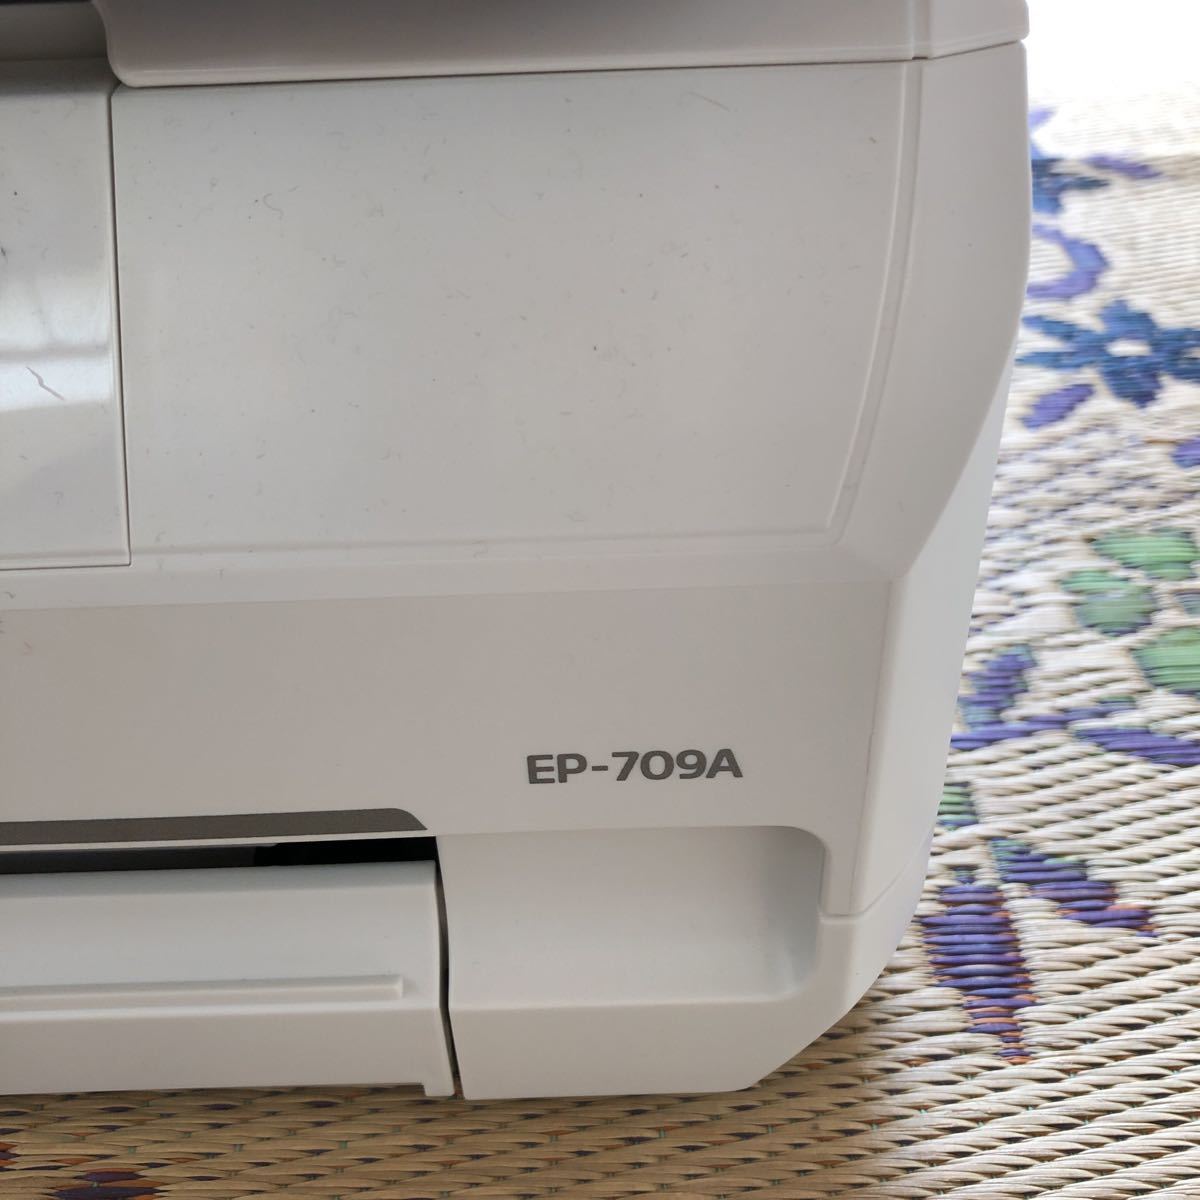 EPSON エプソン インクジェット複合機 EP-805A EP-709A 2台セット 通電